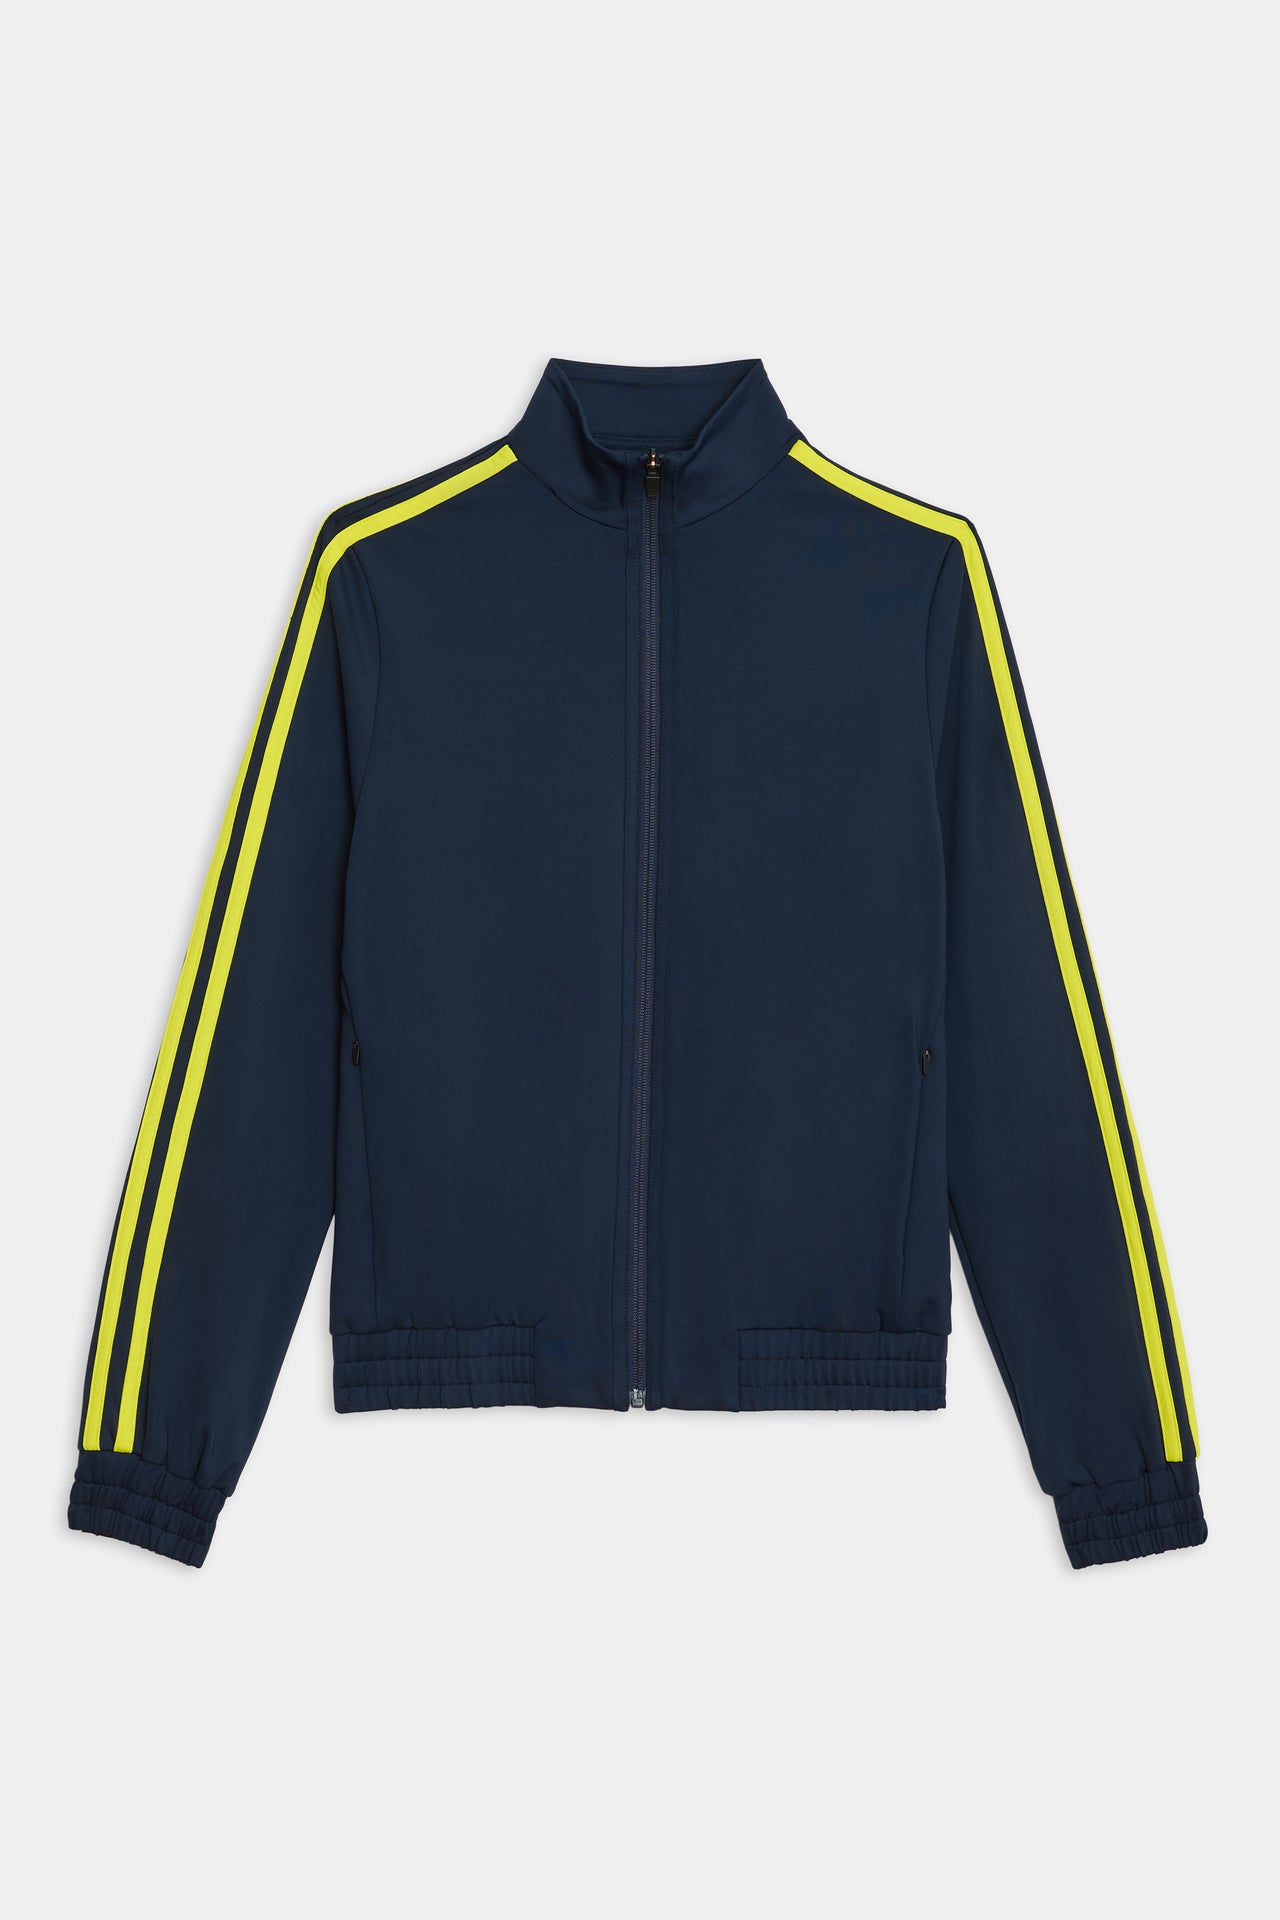 A luxurious SPLITS59 Fox Techflex Jacket in Indigo/Chartreuse with side stripes, perfect as an après workout piece.